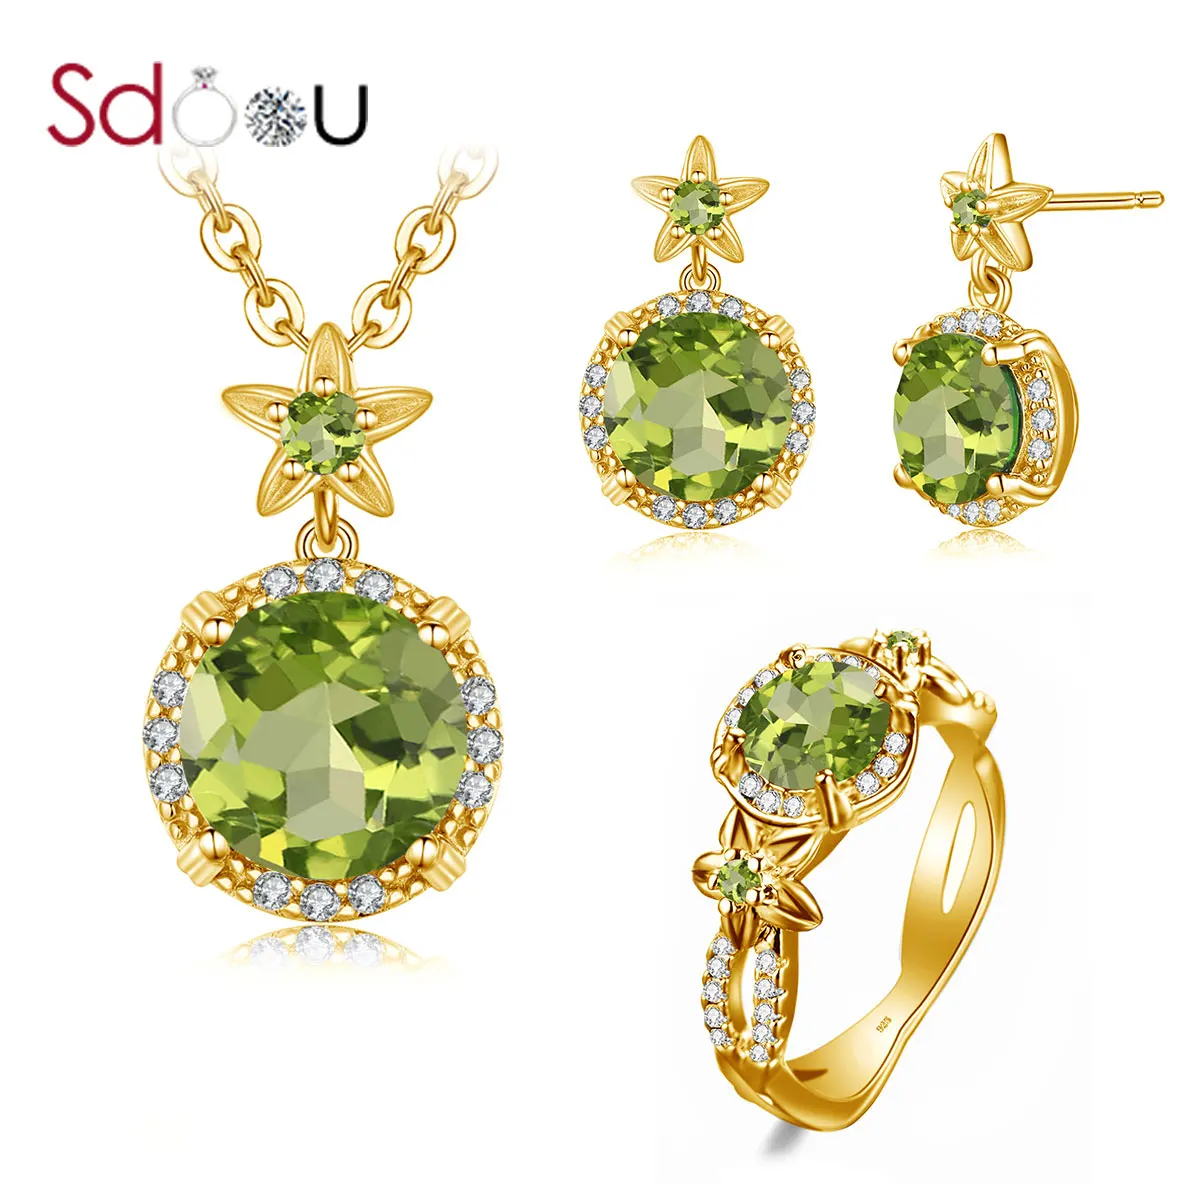 

SDOOU 14K Gold Jewelry Sets For Women Real 925 Sterling Silver Ring Stud Earrings Pendant Necklace Green Peridot Trendy Jewelry